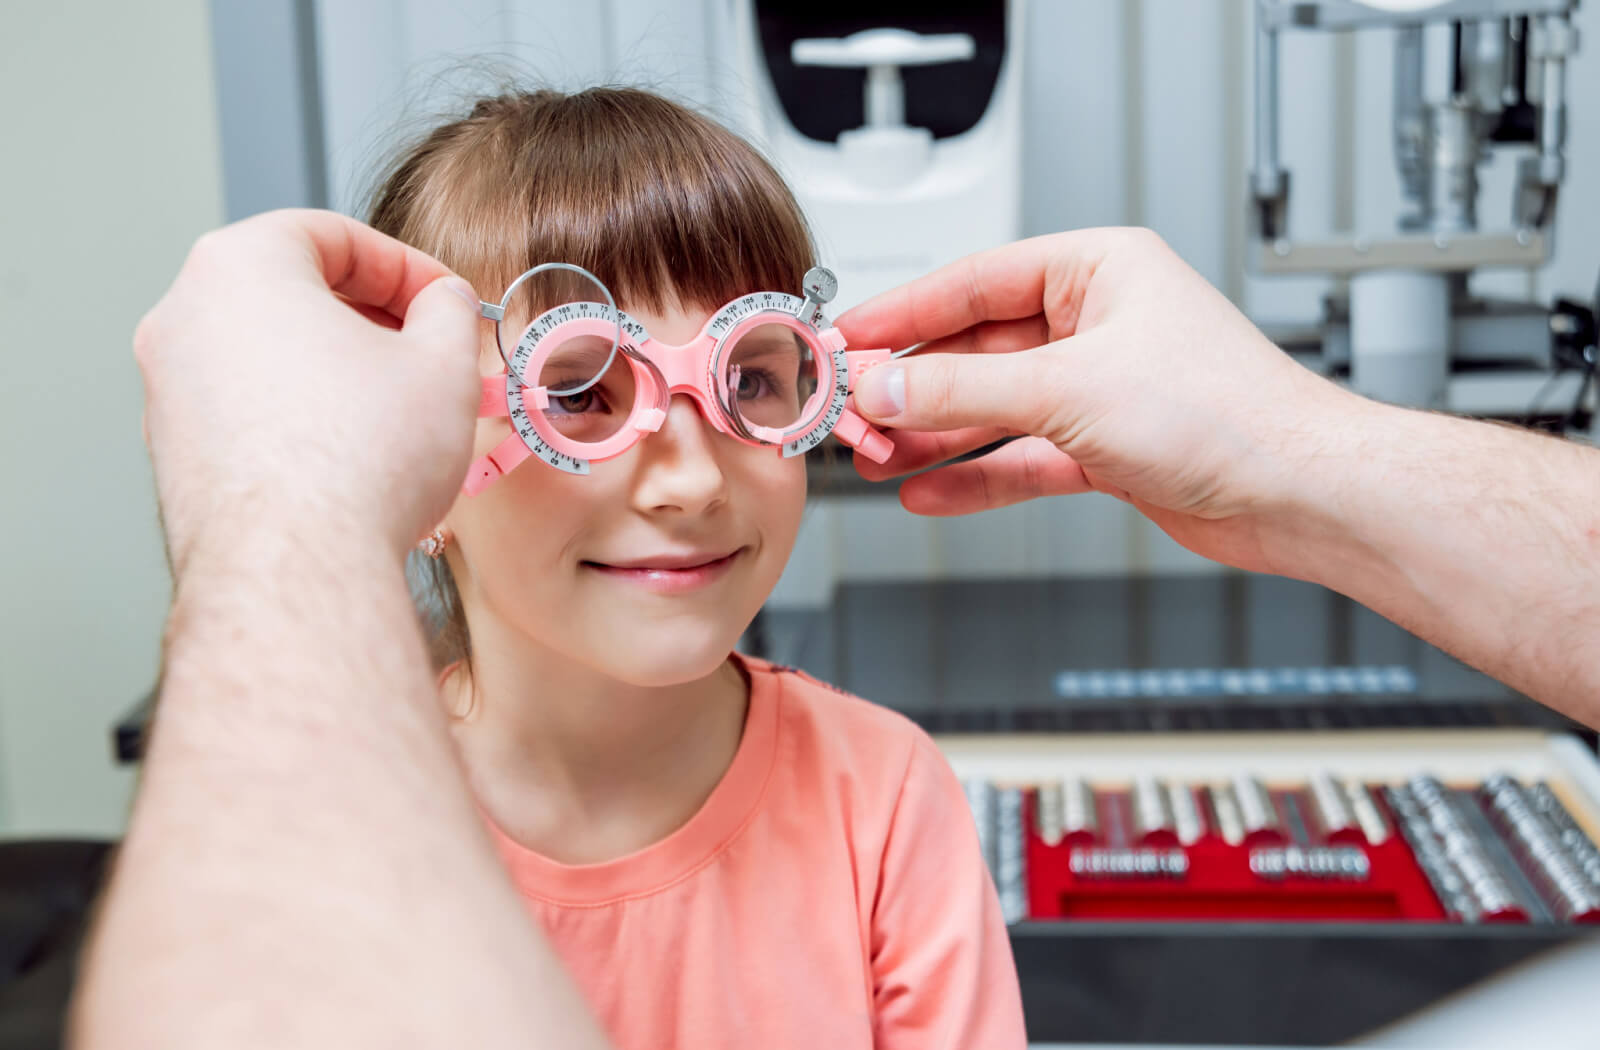 a child has an eye exam to determine if she has myopia